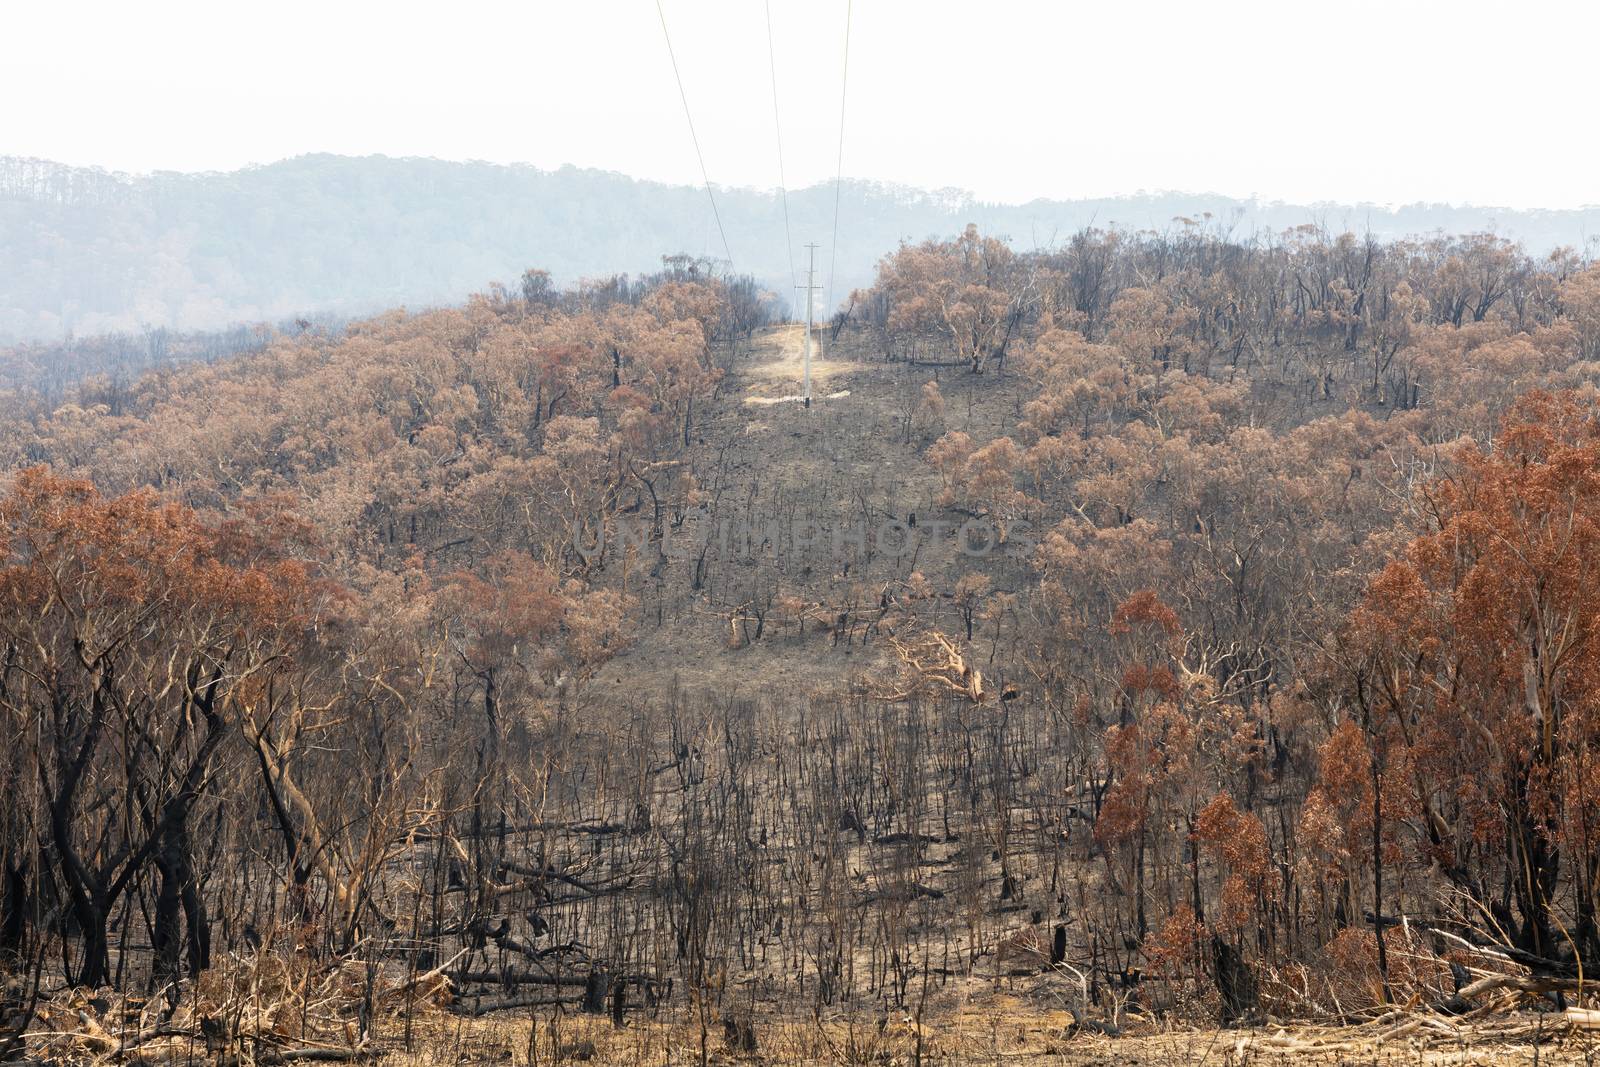 Electrical transmission lines affected by bushfire in The Blue Mountains in Australia by WittkePhotos